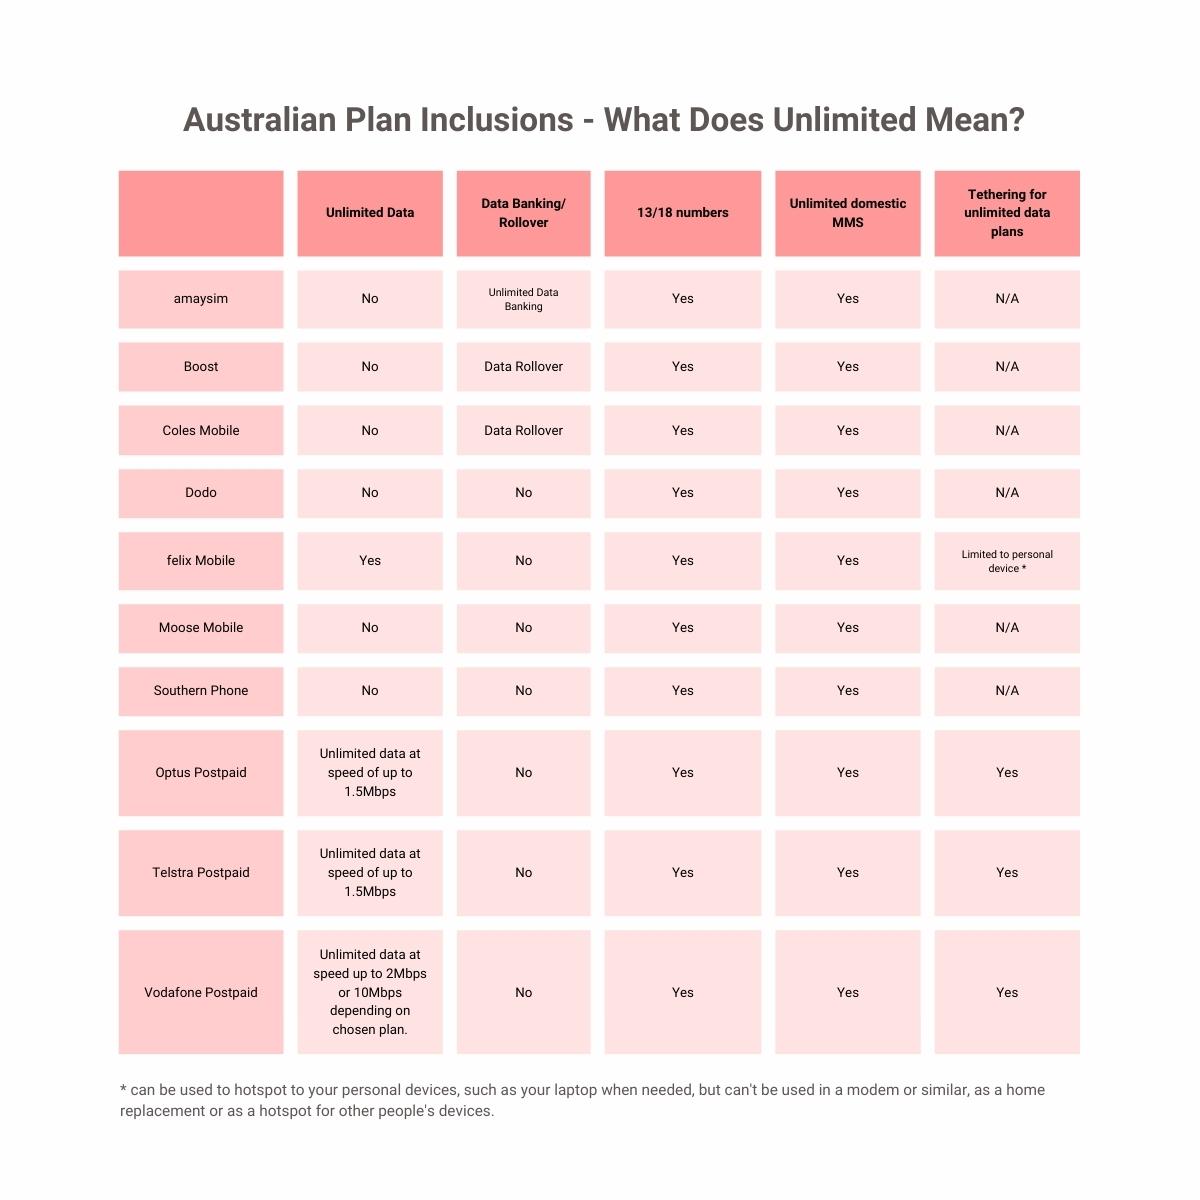 Australian Prepaid Plan inclusions can change subtly depending on your chosen provider. Check the chart above and the CIS of your provider before signing up to ensure you get what you need!